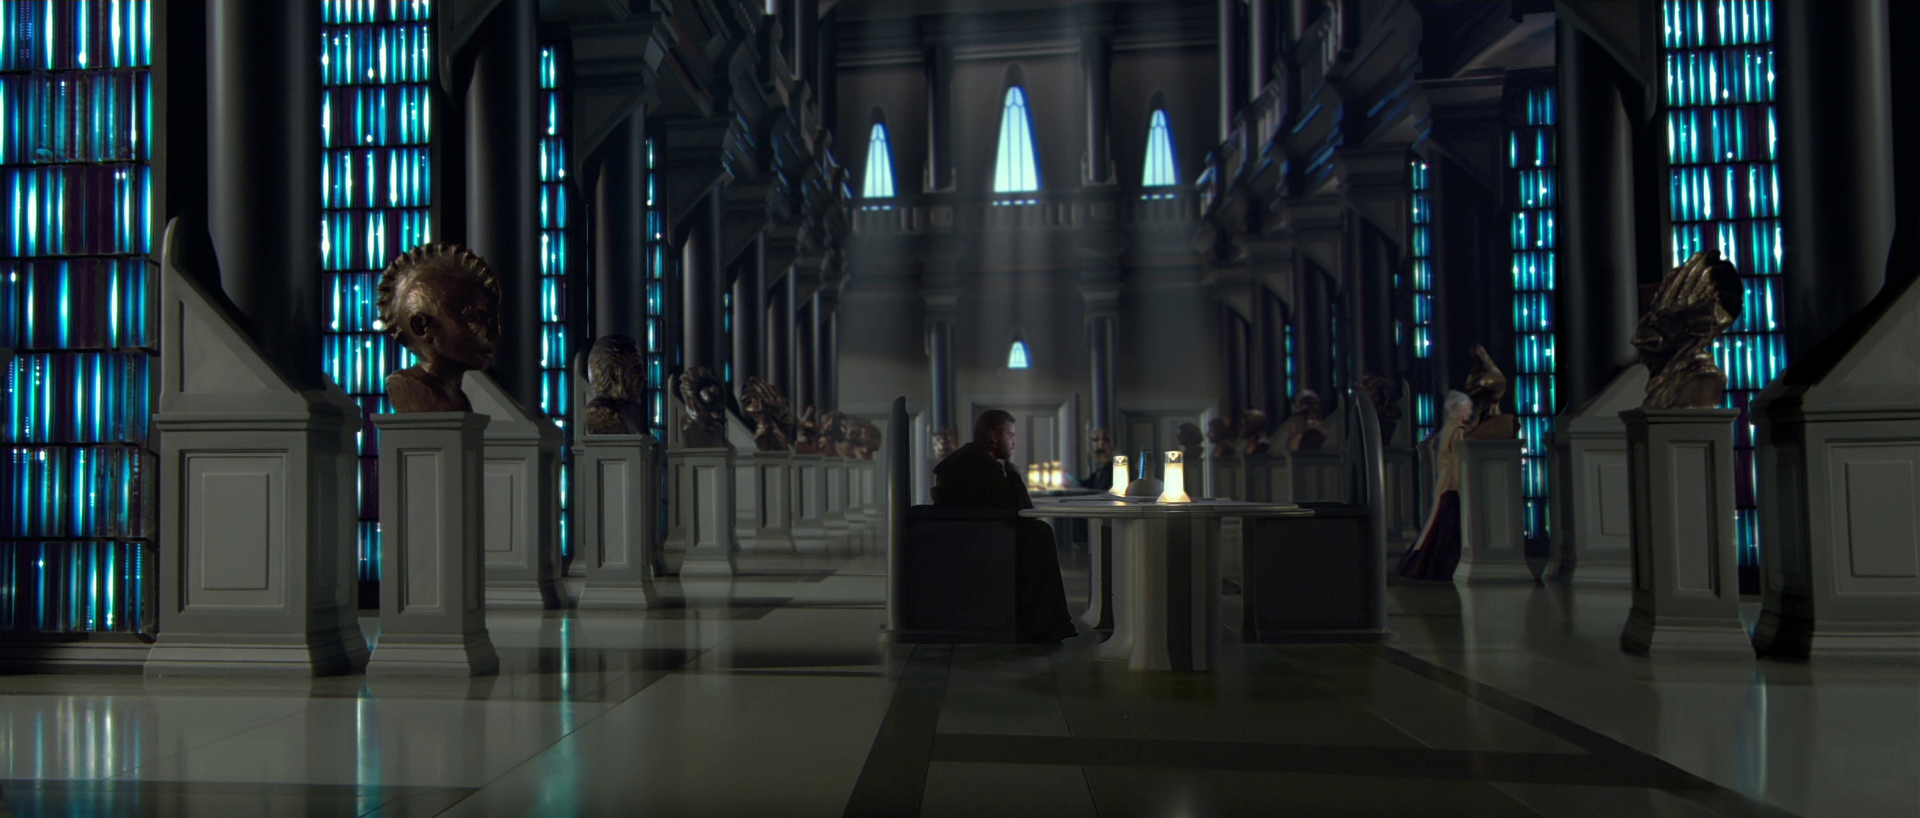 Futuristic library as seen in Star Wars